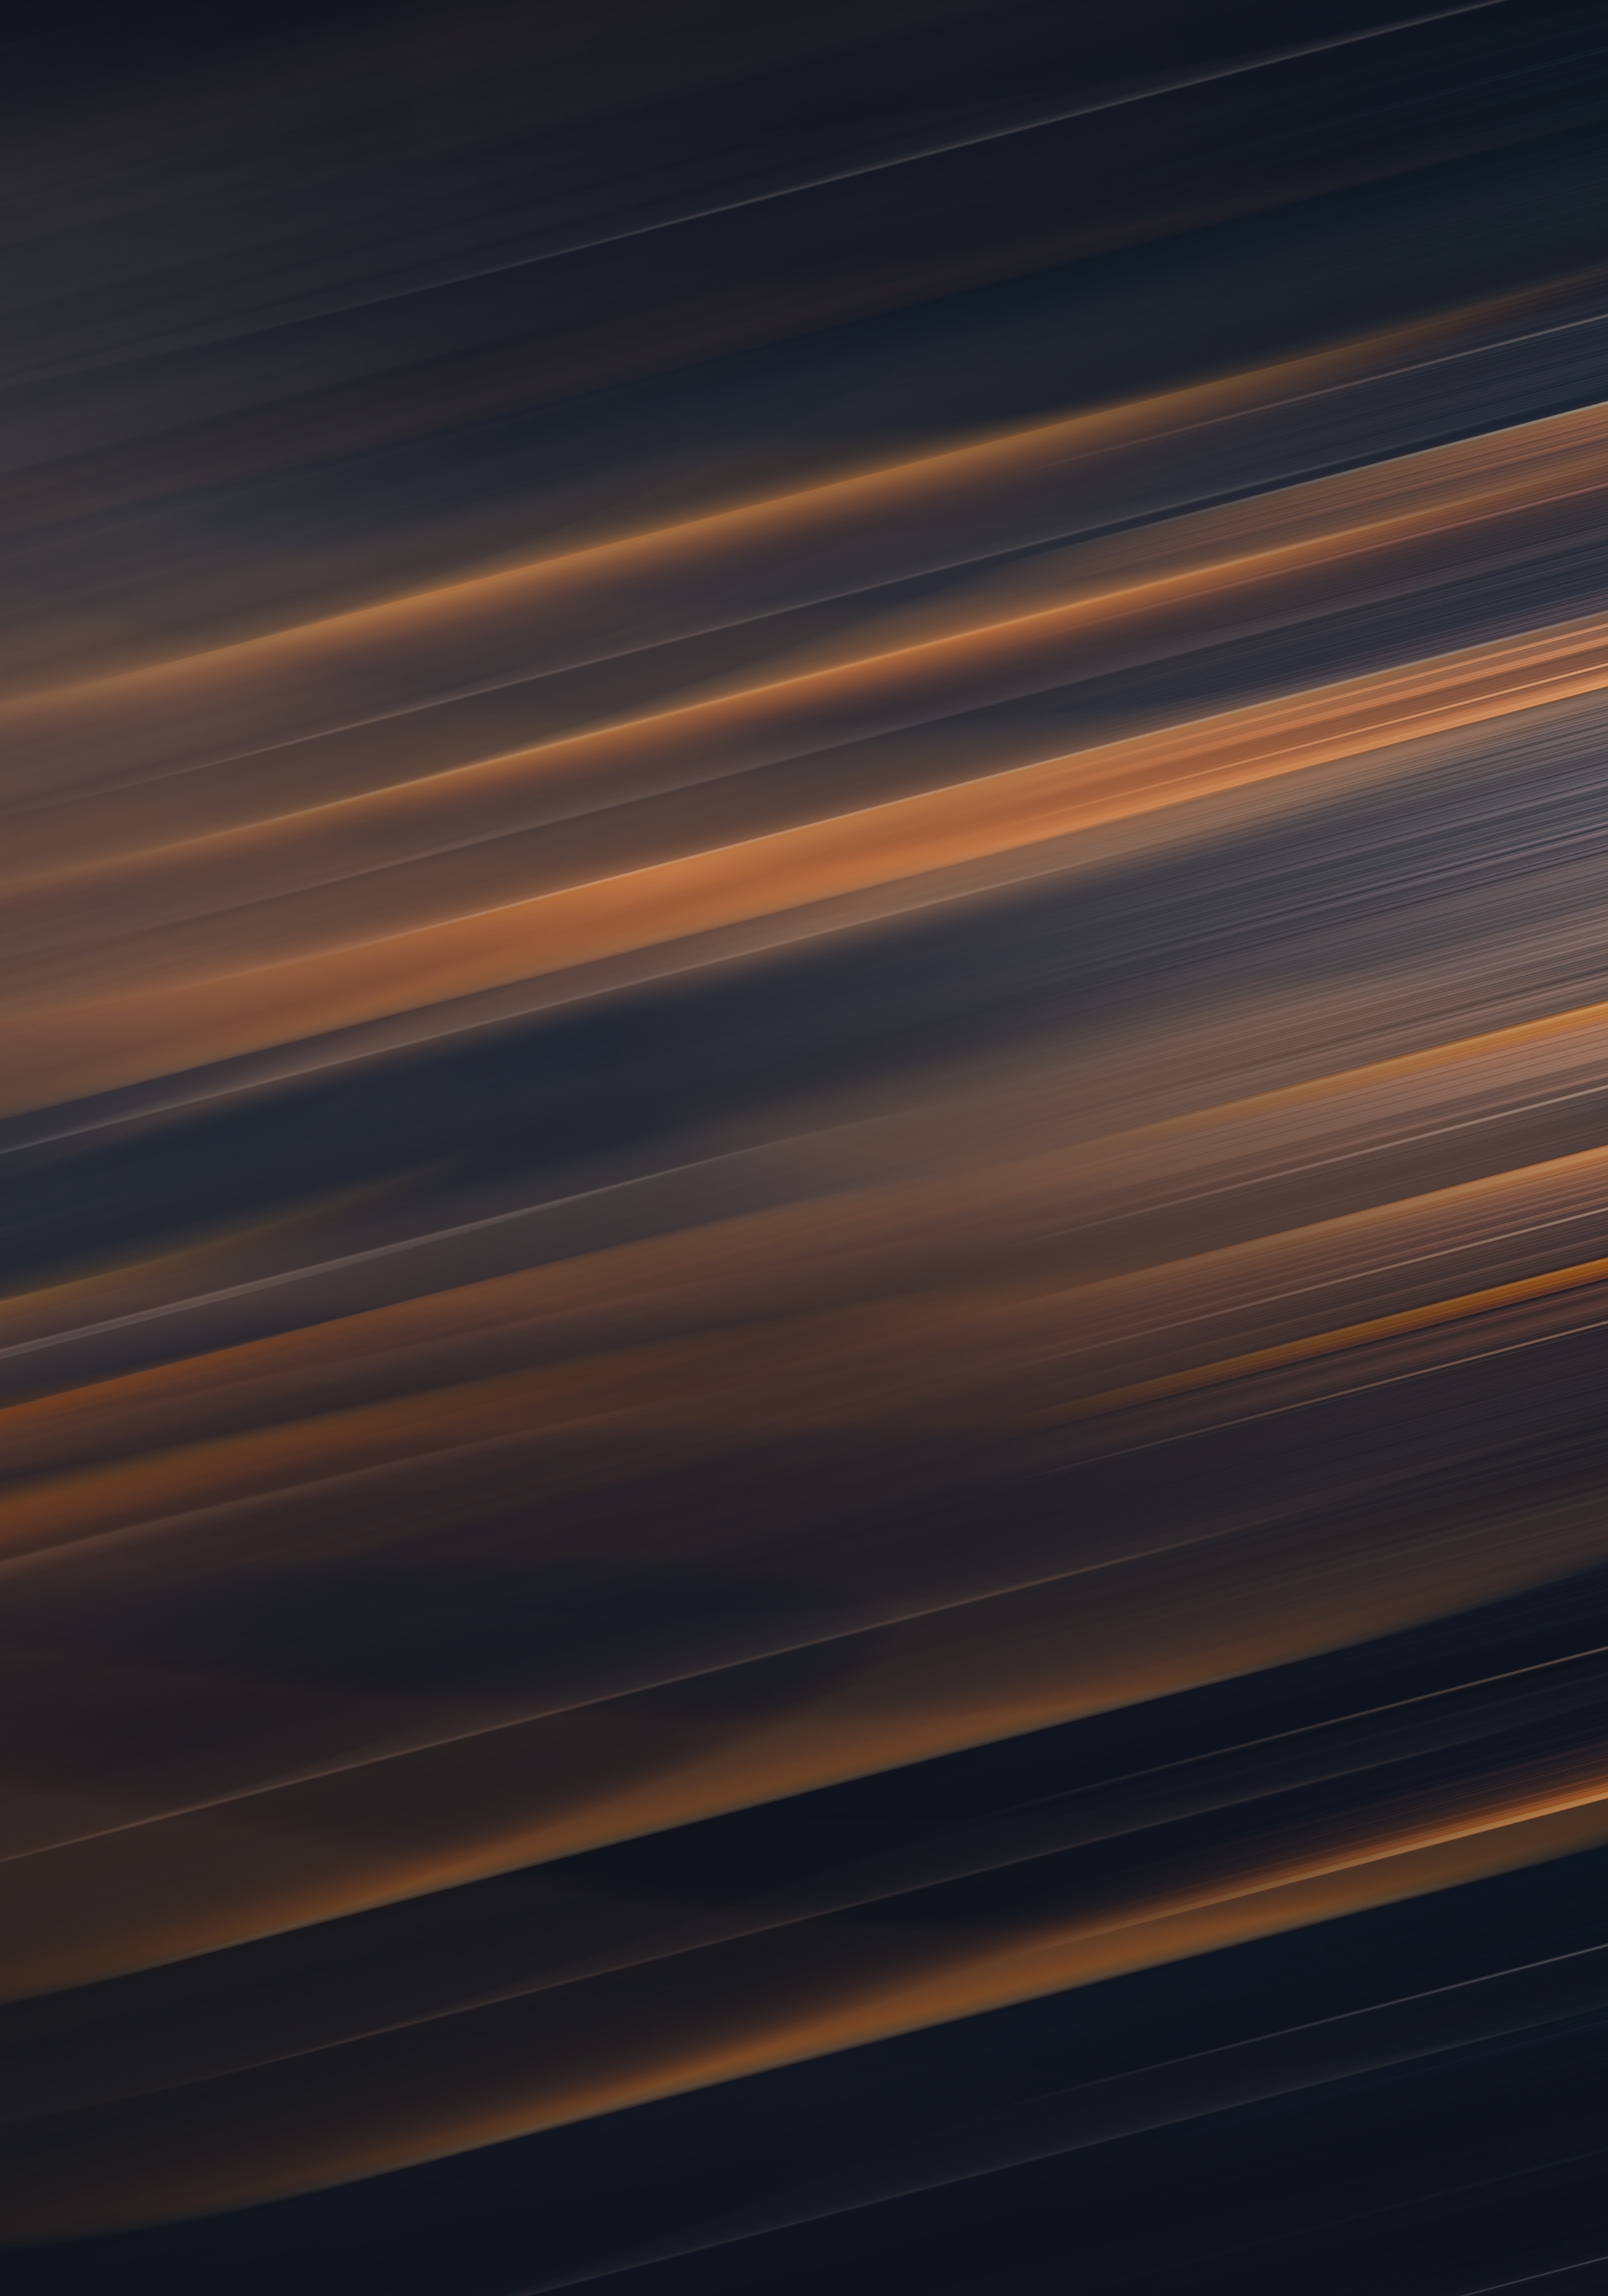 streaks, stripes, diagonal, abstract, rays, beams, lines, glow Smartphone Background